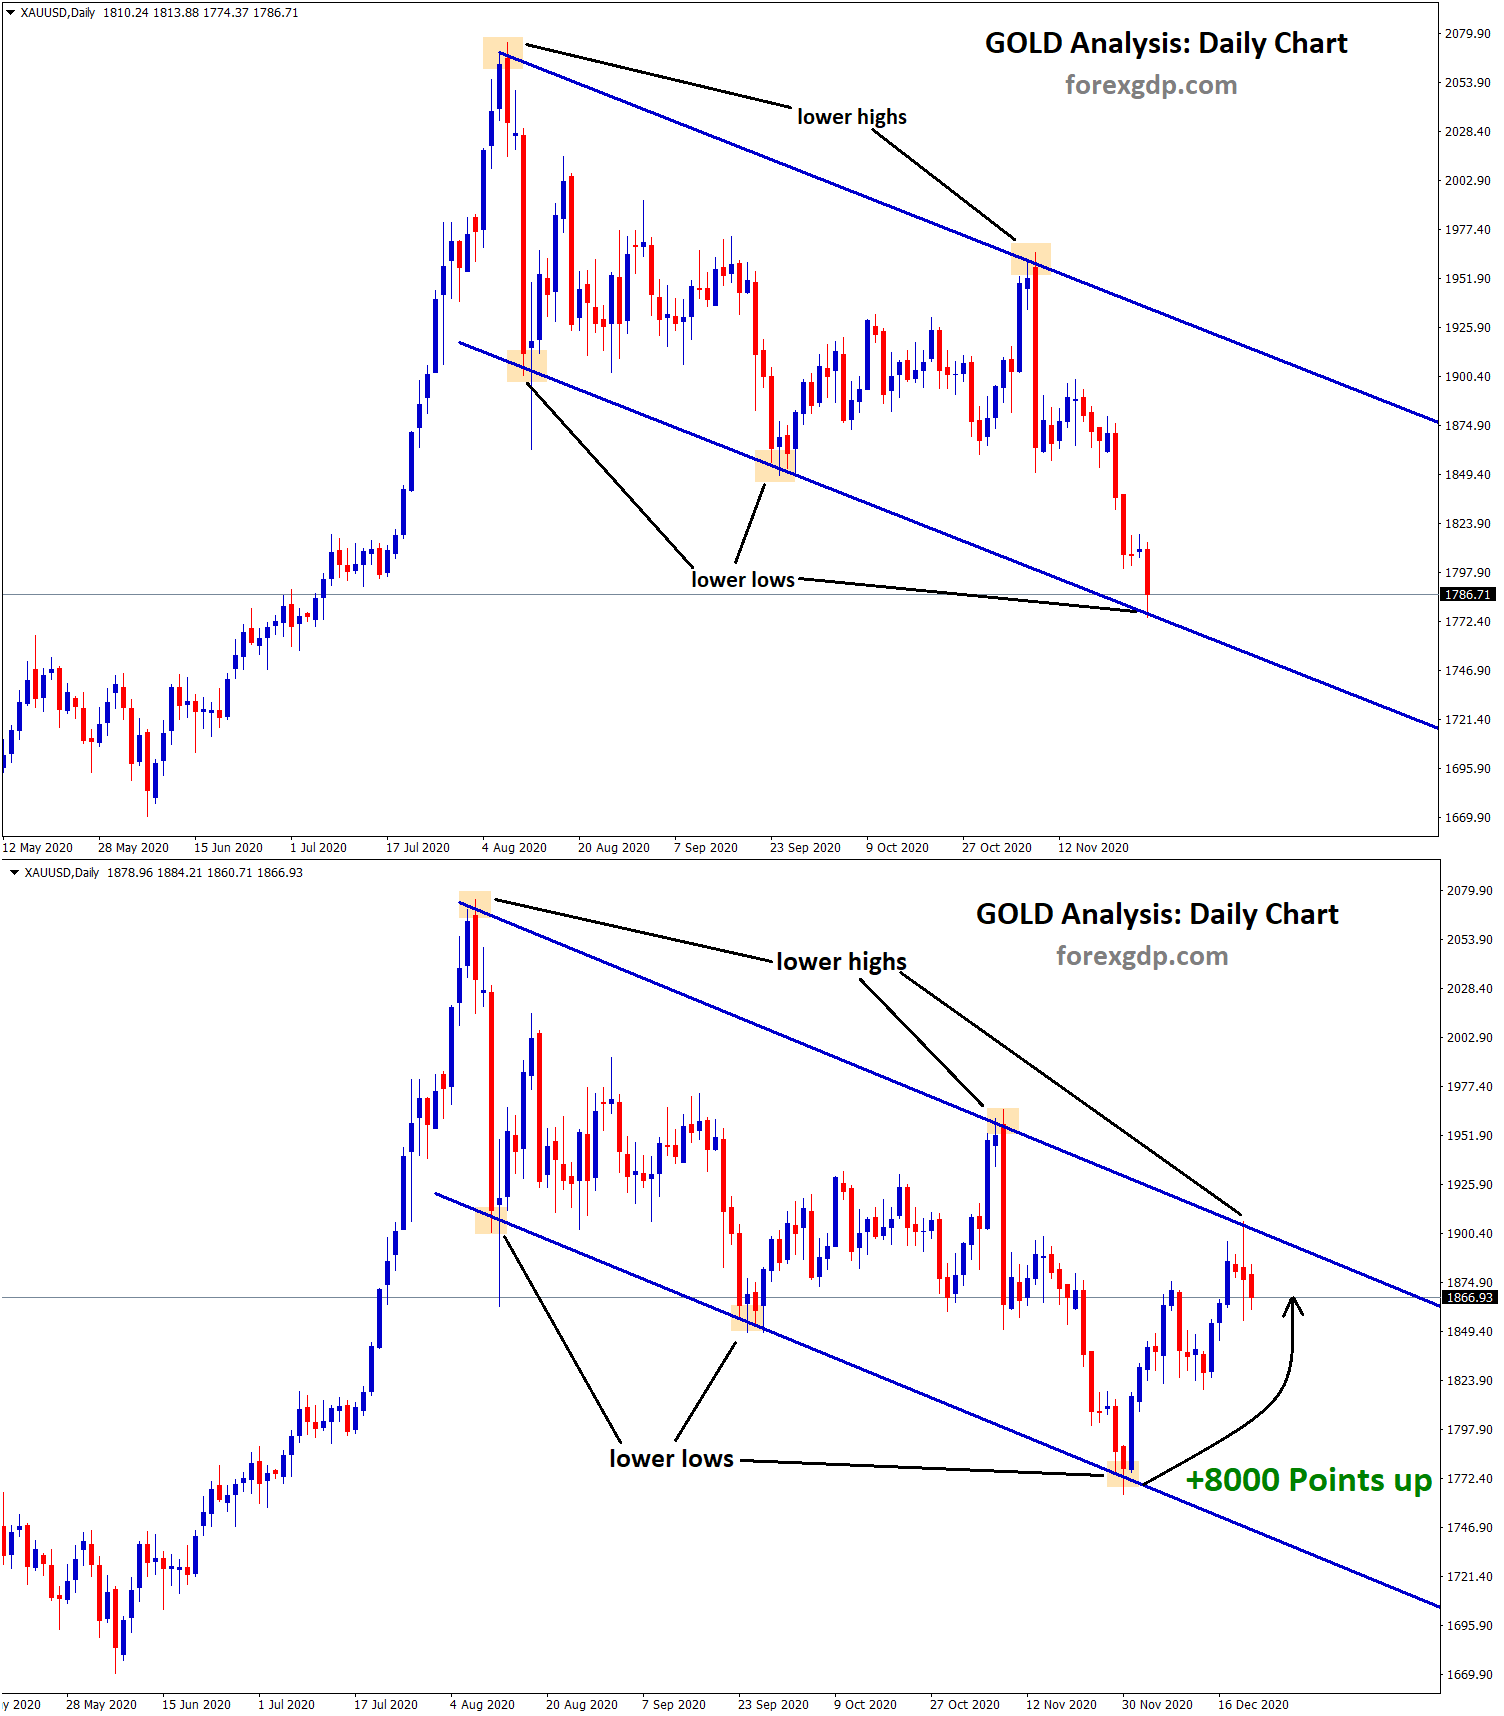 gold rise up from lower low to lower high